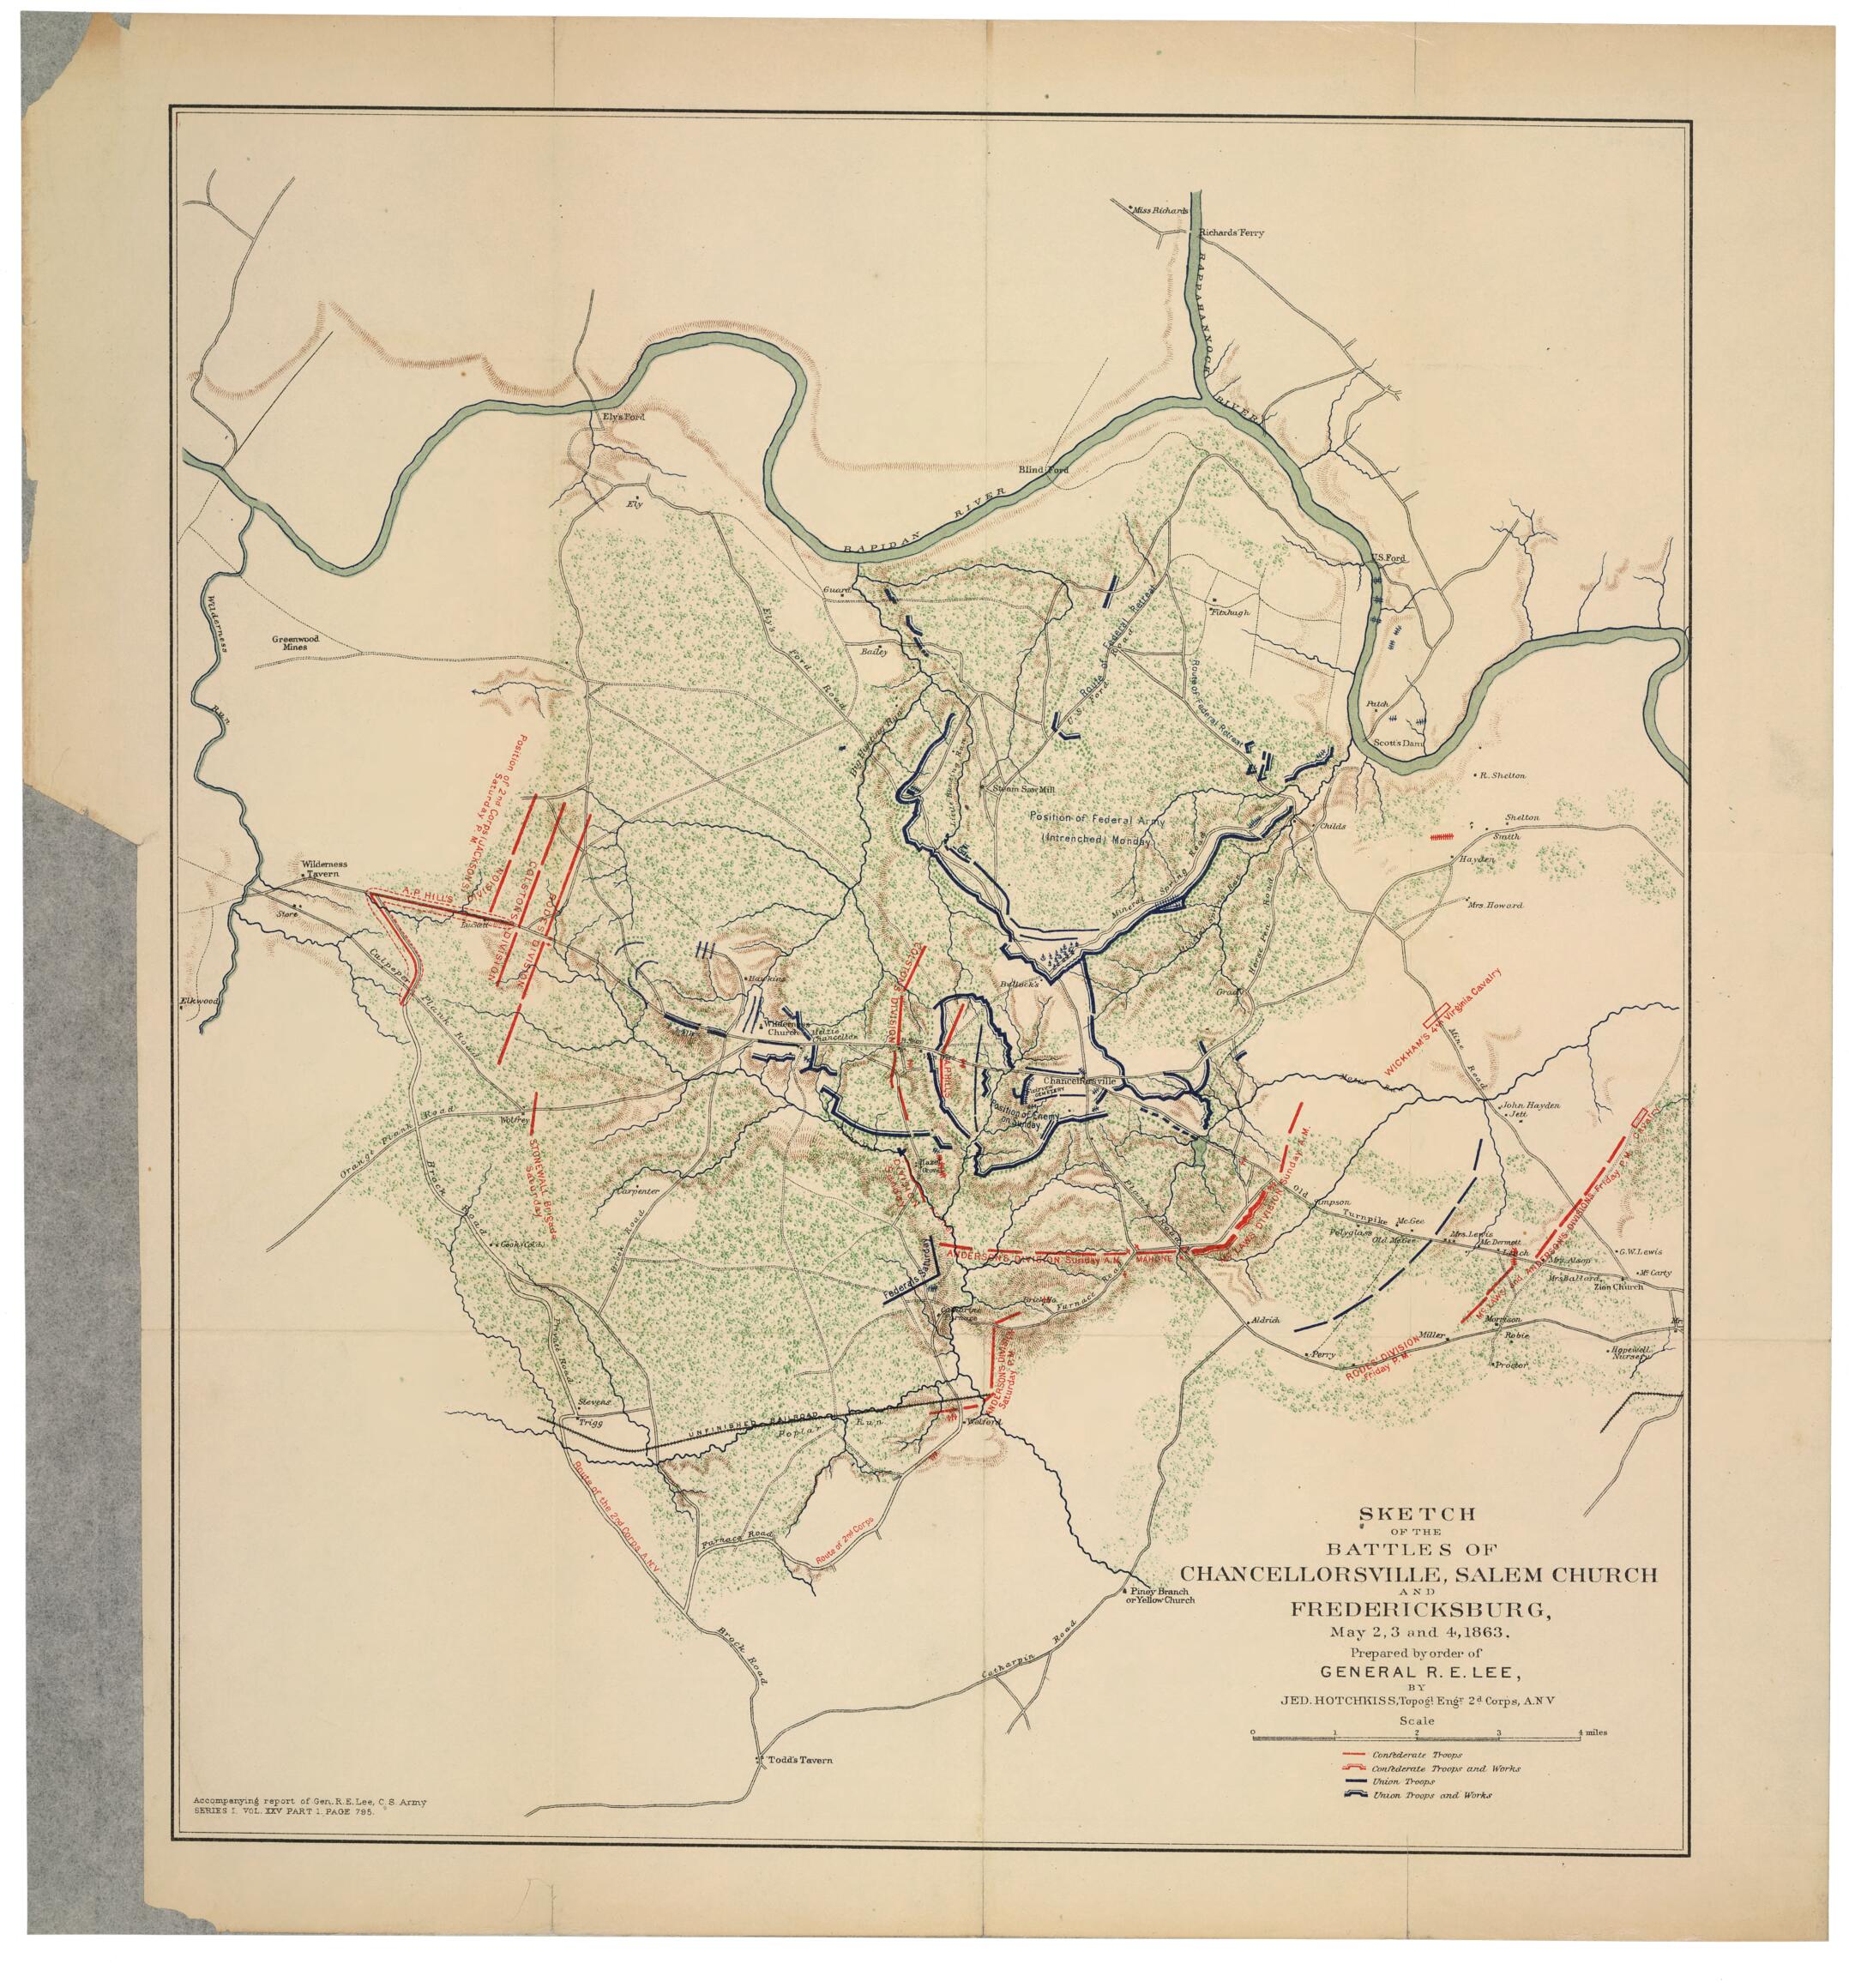 This old map of Sketch of the Battles of Chancellorsville, Salem Church, and Fredericksburg, May 2, 3, and 4, 1863 from 1891 was created by Jedediah Hotchkiss in 1891